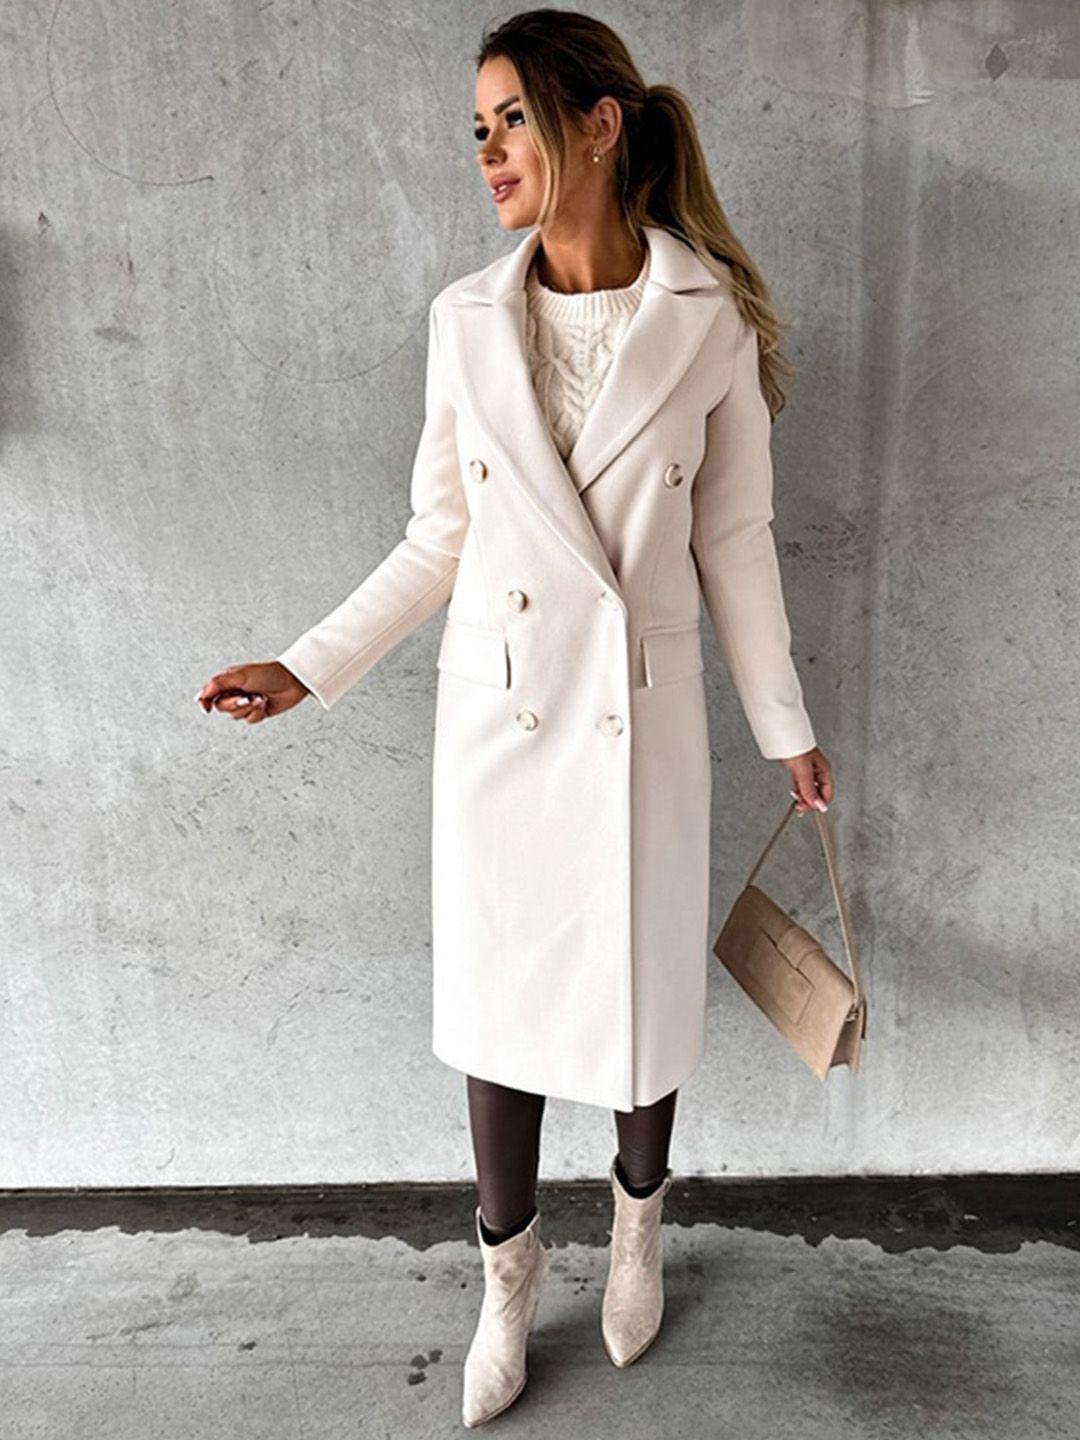 stylecast double-breasted overcoat